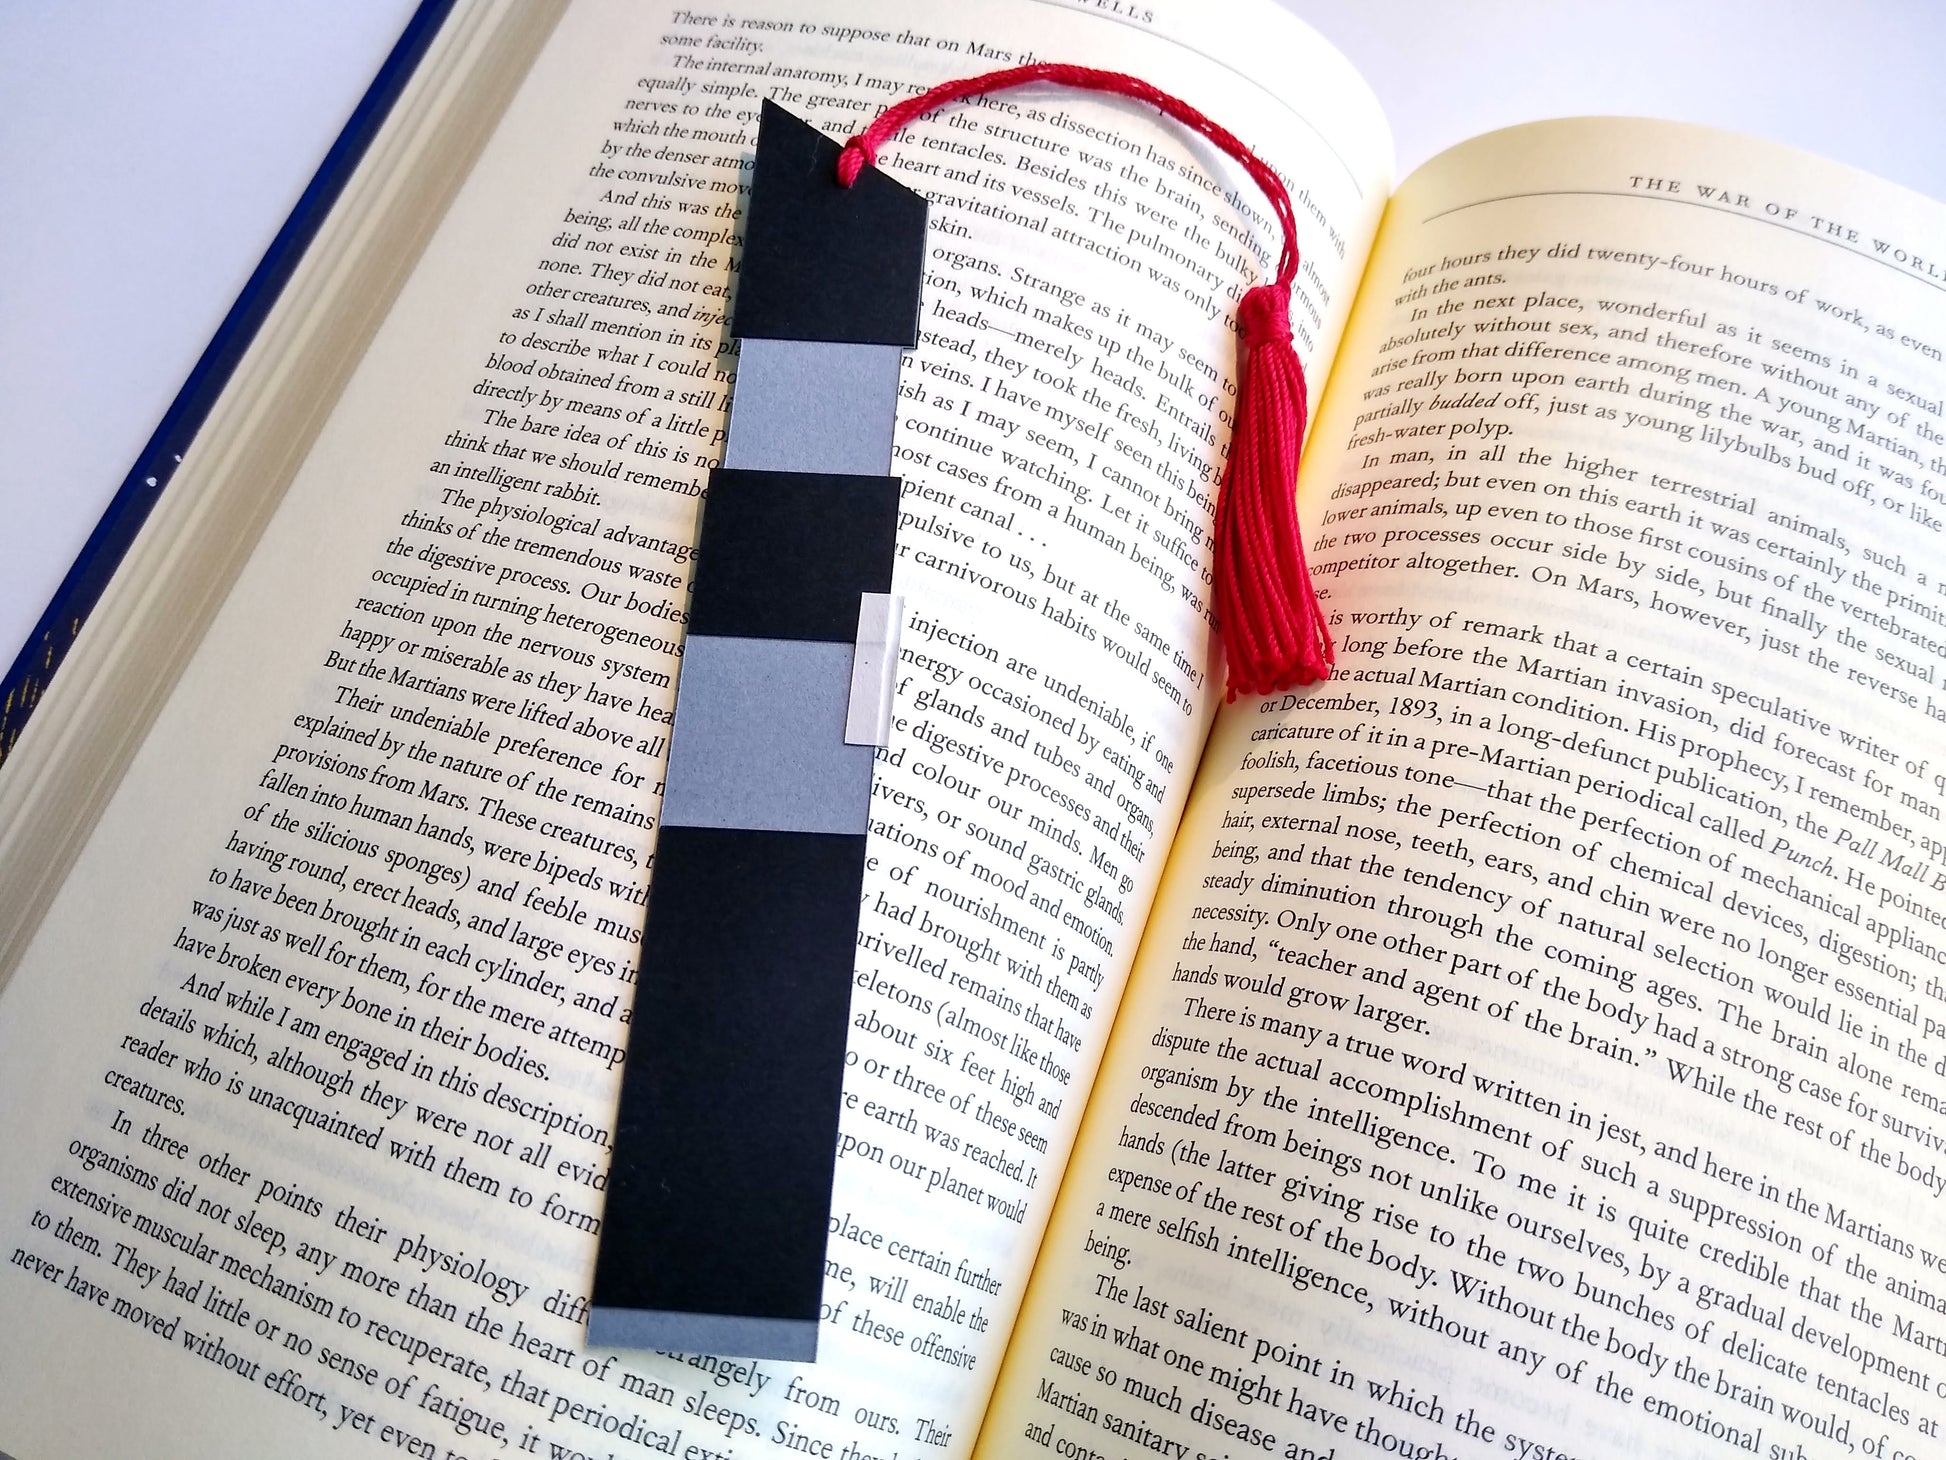 A bookmark designed like the handle of Darth Vader's lightsaber rests on top of an open book. The red tassel curls around and rests in dip between the pages.